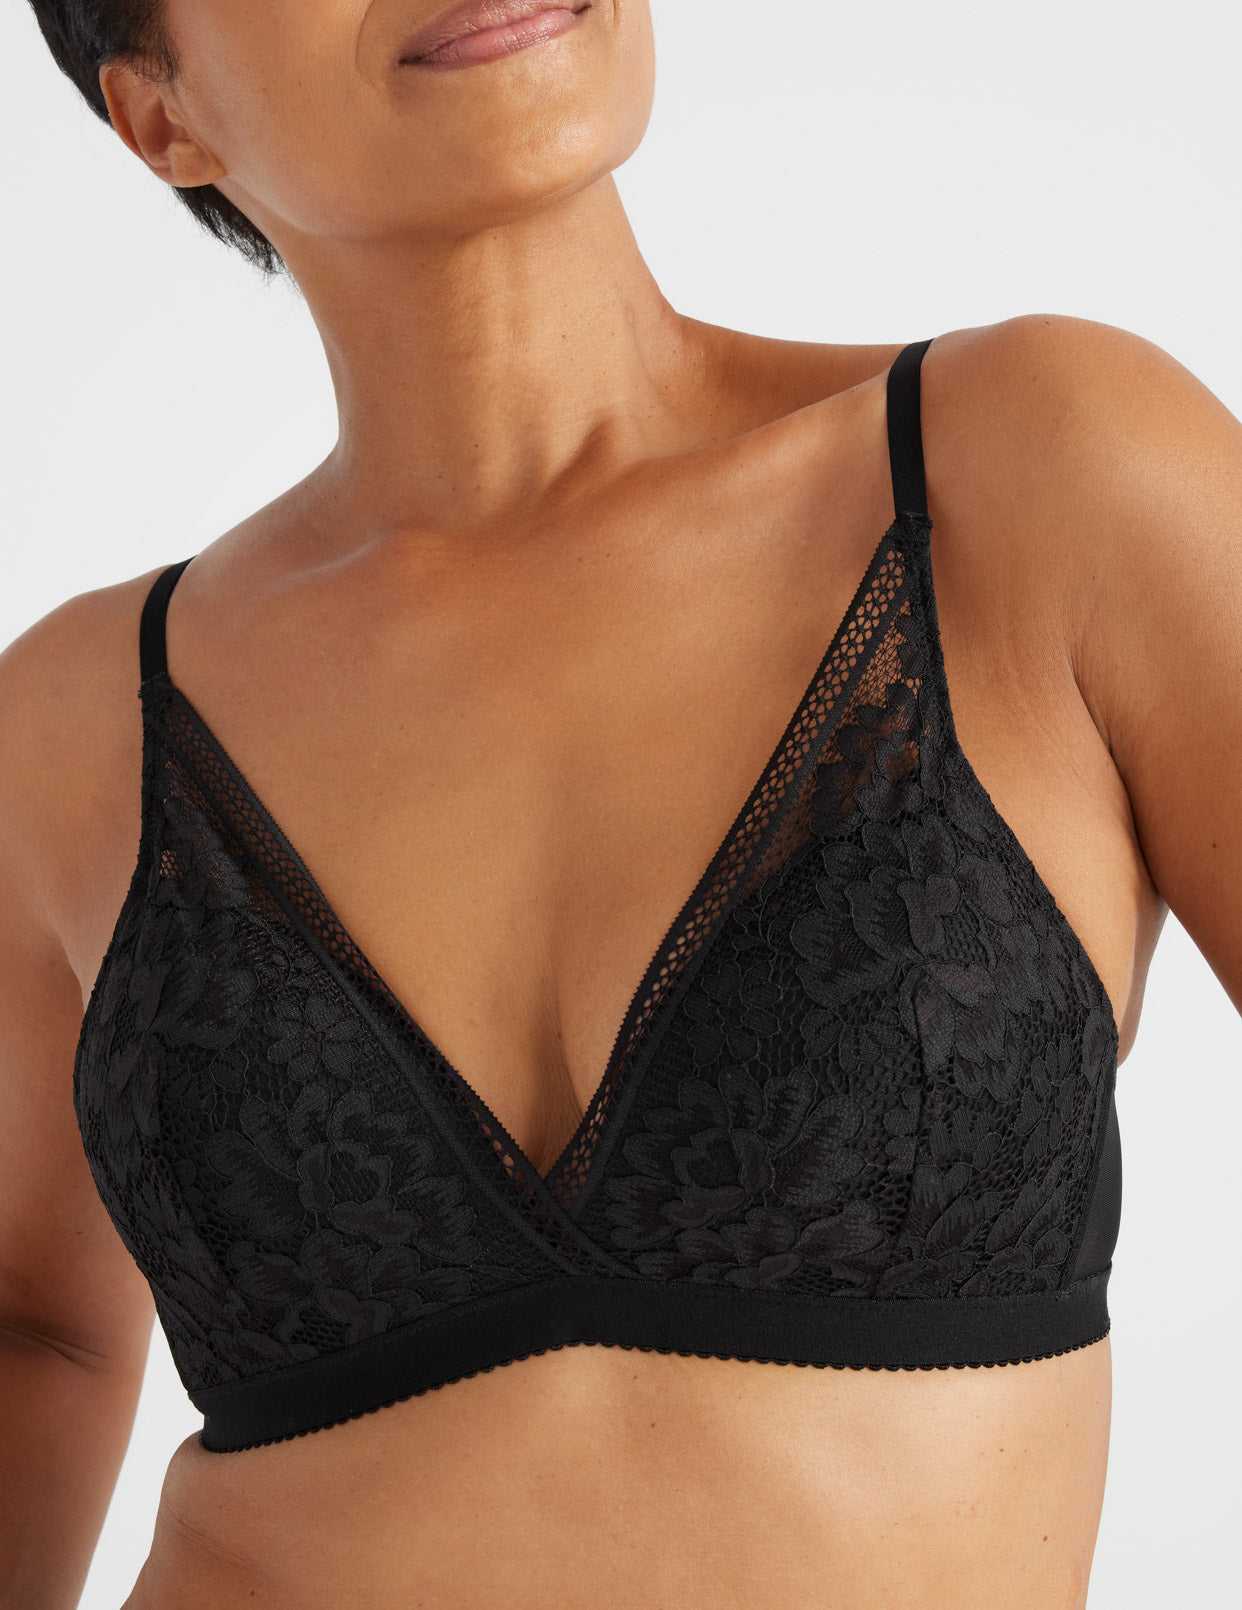 The best bras for small busts fit like a dream, with no pesky gaping or  poking underwires. From everyday T-shirt bras to lace options for special  occasions, we selected a …